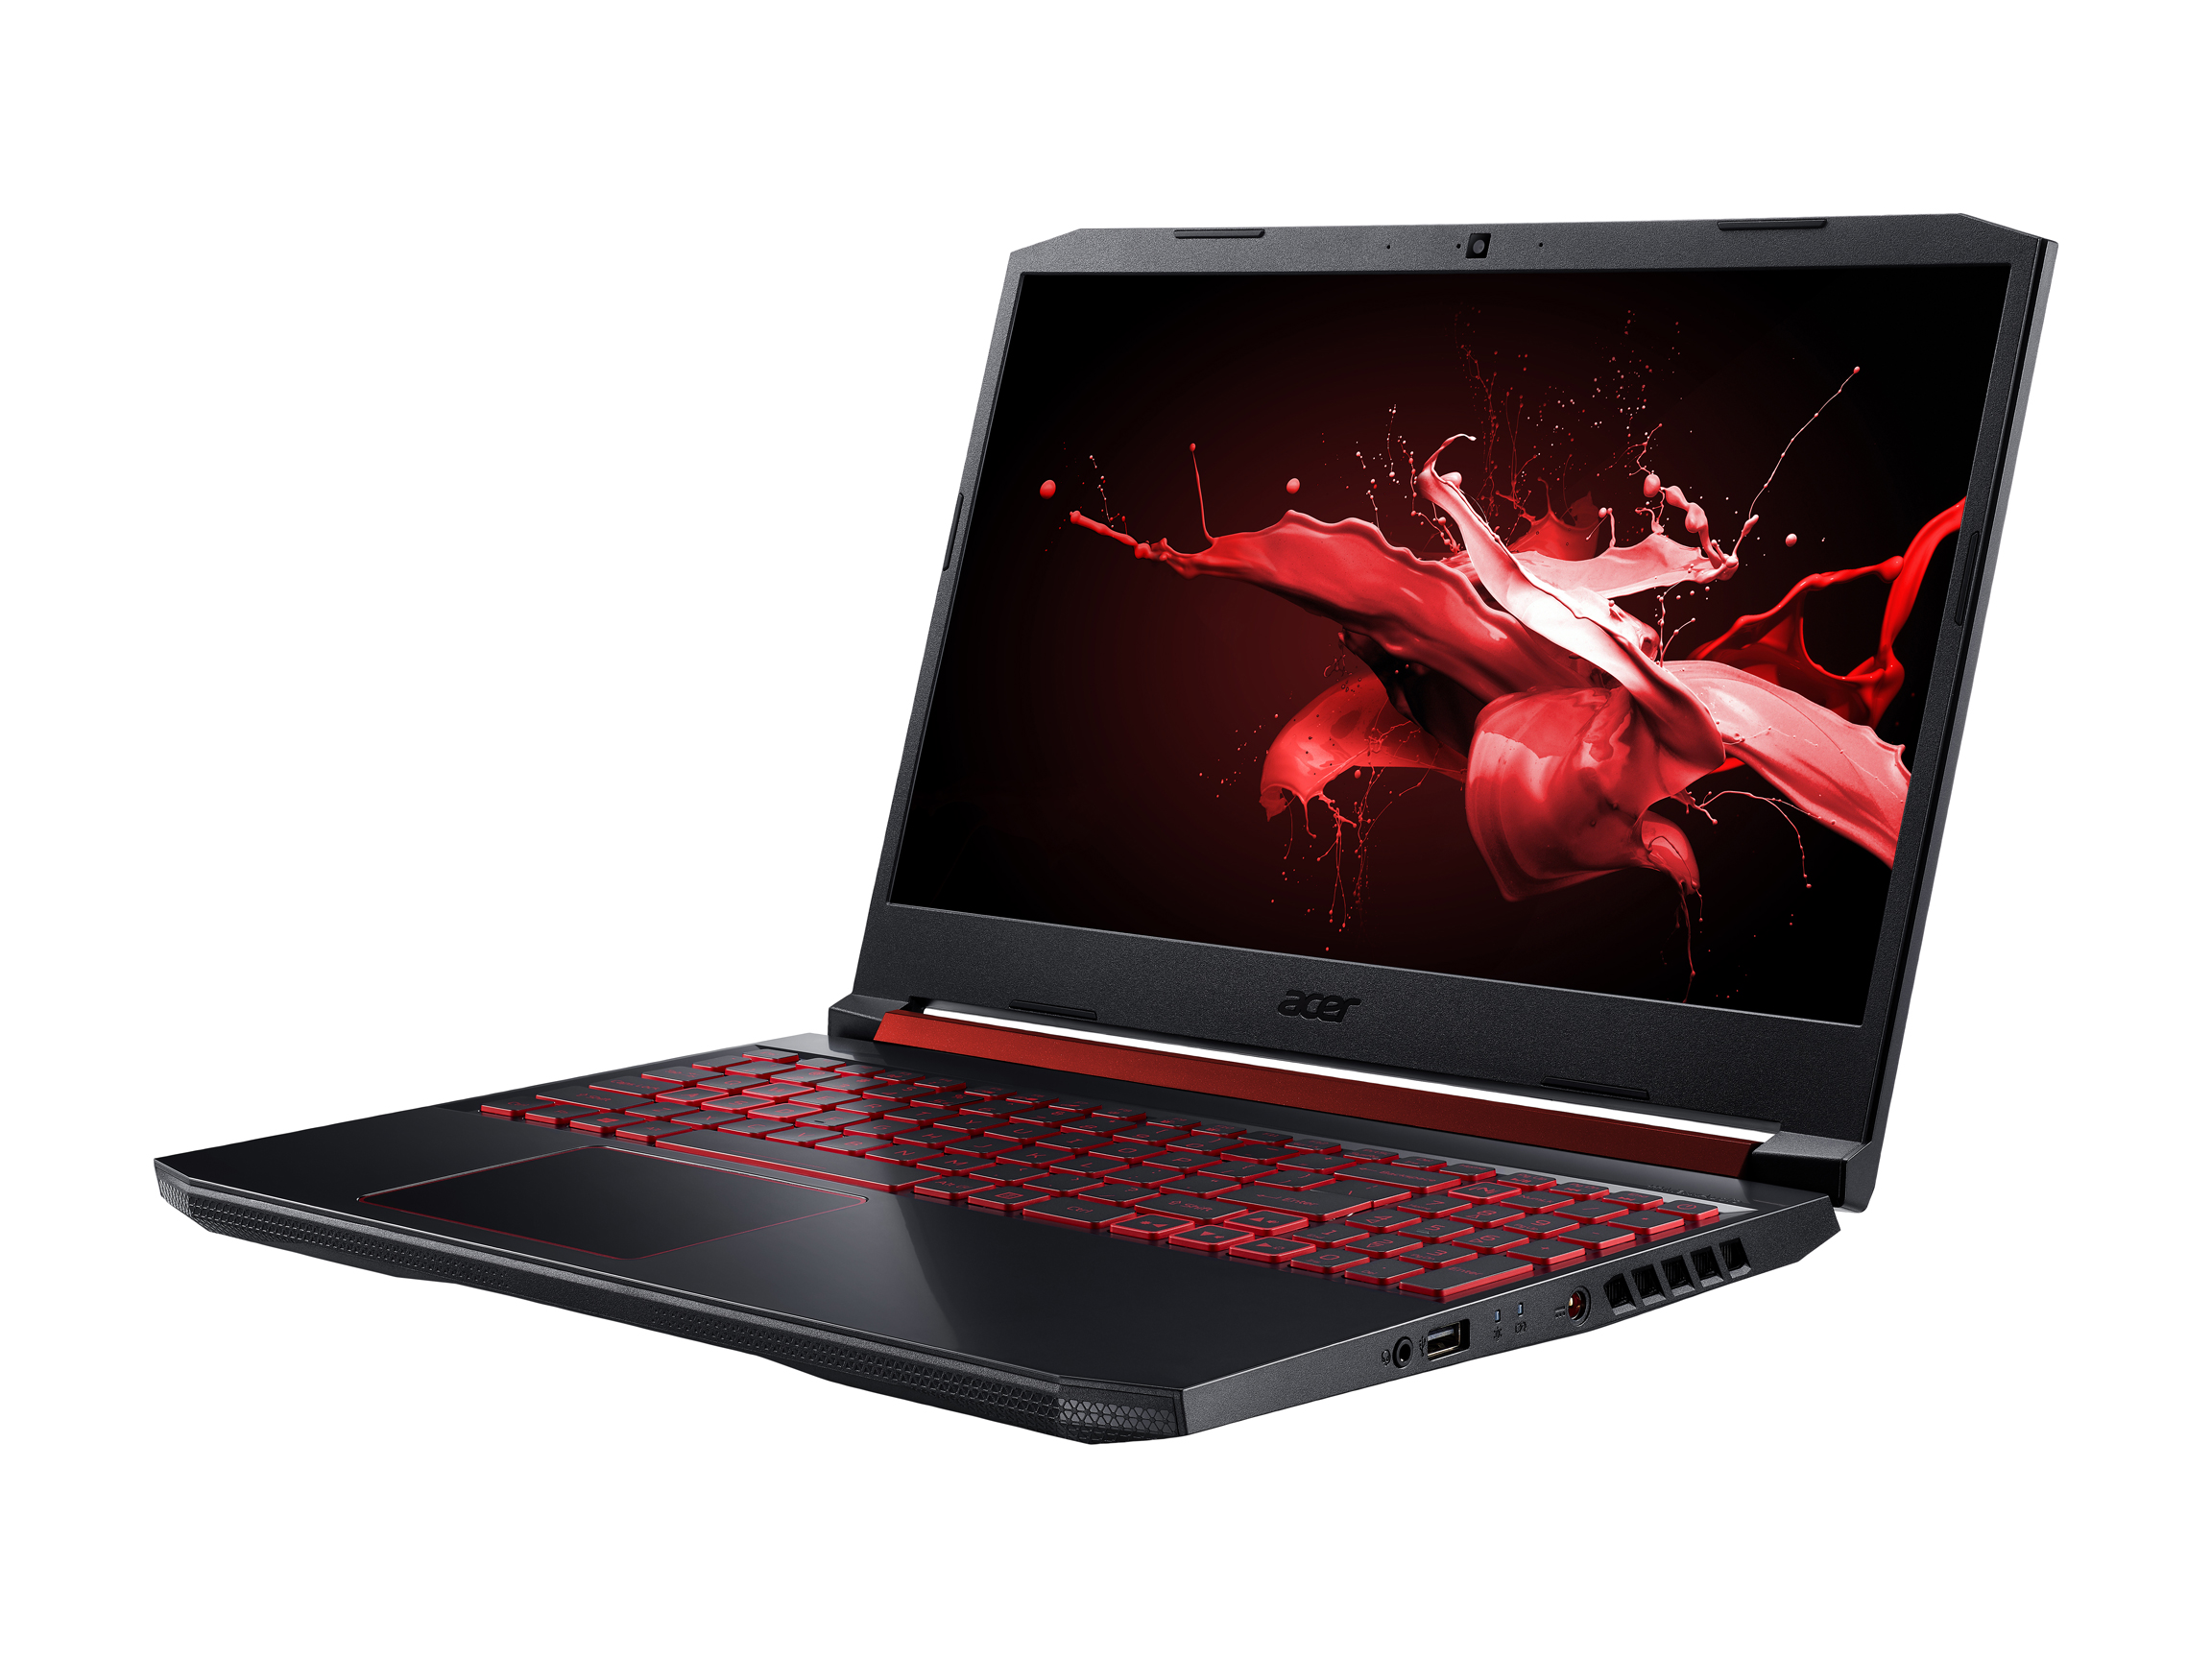 Read more about the article 2021 Acer Nitro 5 Gaming Laptop Review: An Affordable, Pretty, and Powerful